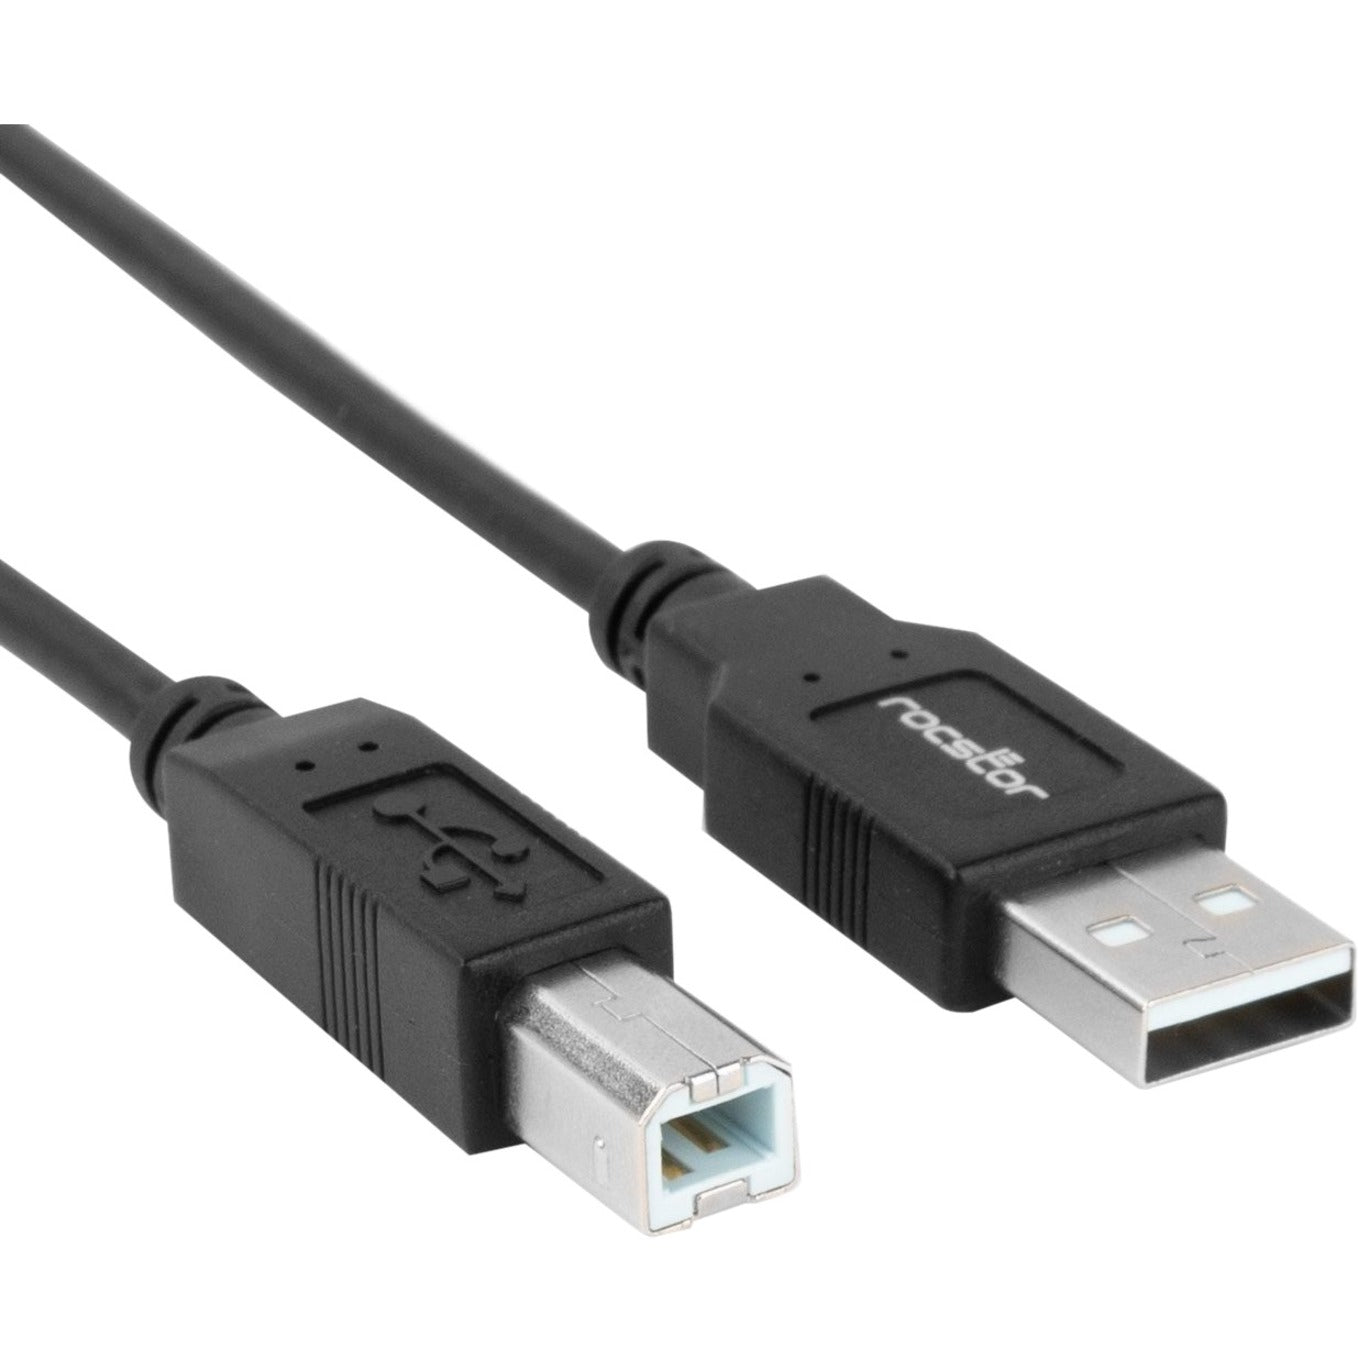 Rocstor Y10C115-B1 Premium 10 ft USB 2.0 Type-A to Type-B Cable - M/M, Data Transfer Cable